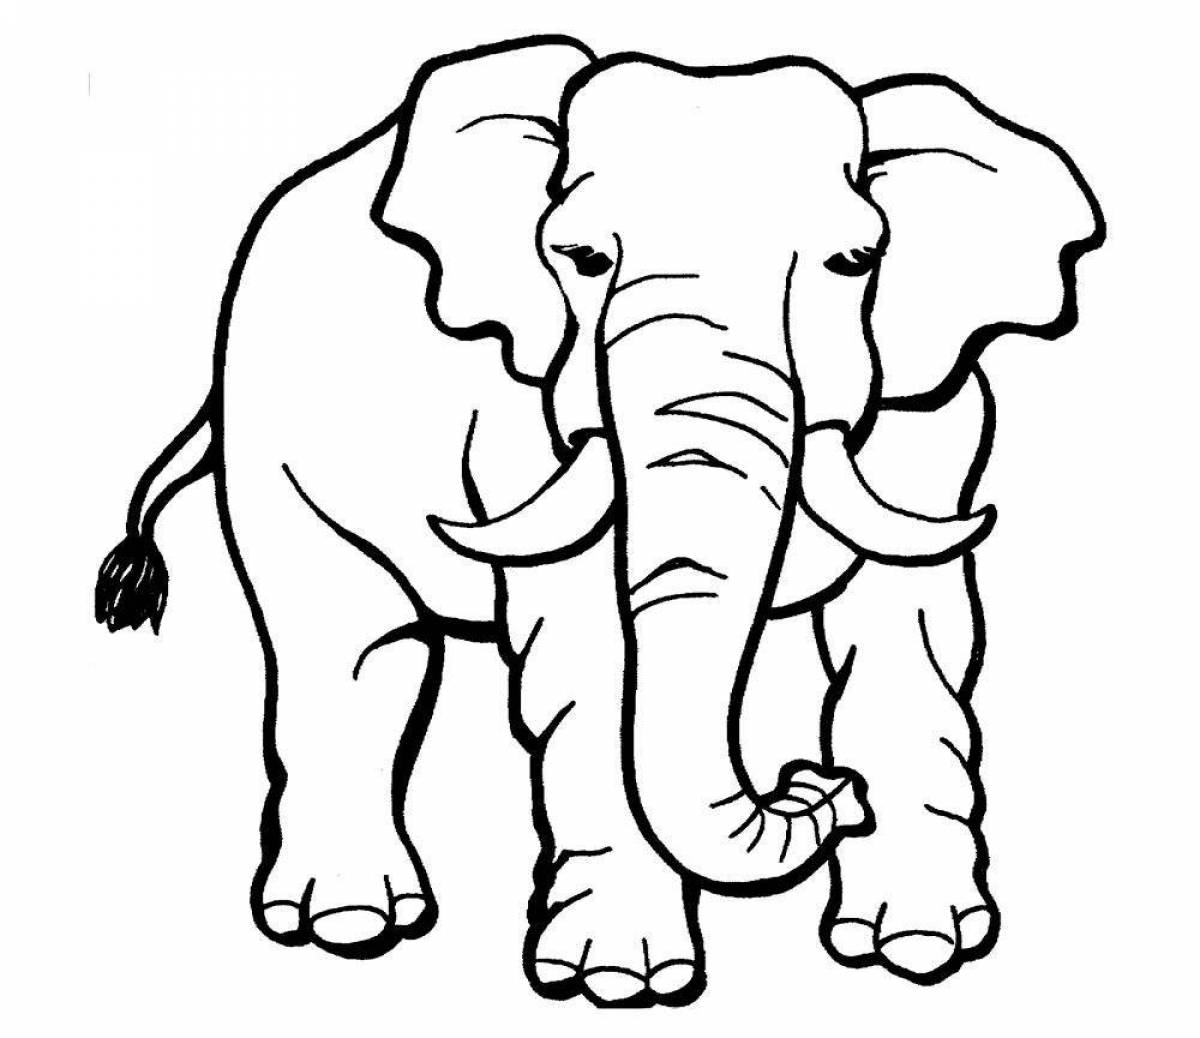 Cute pink elephant coloring page